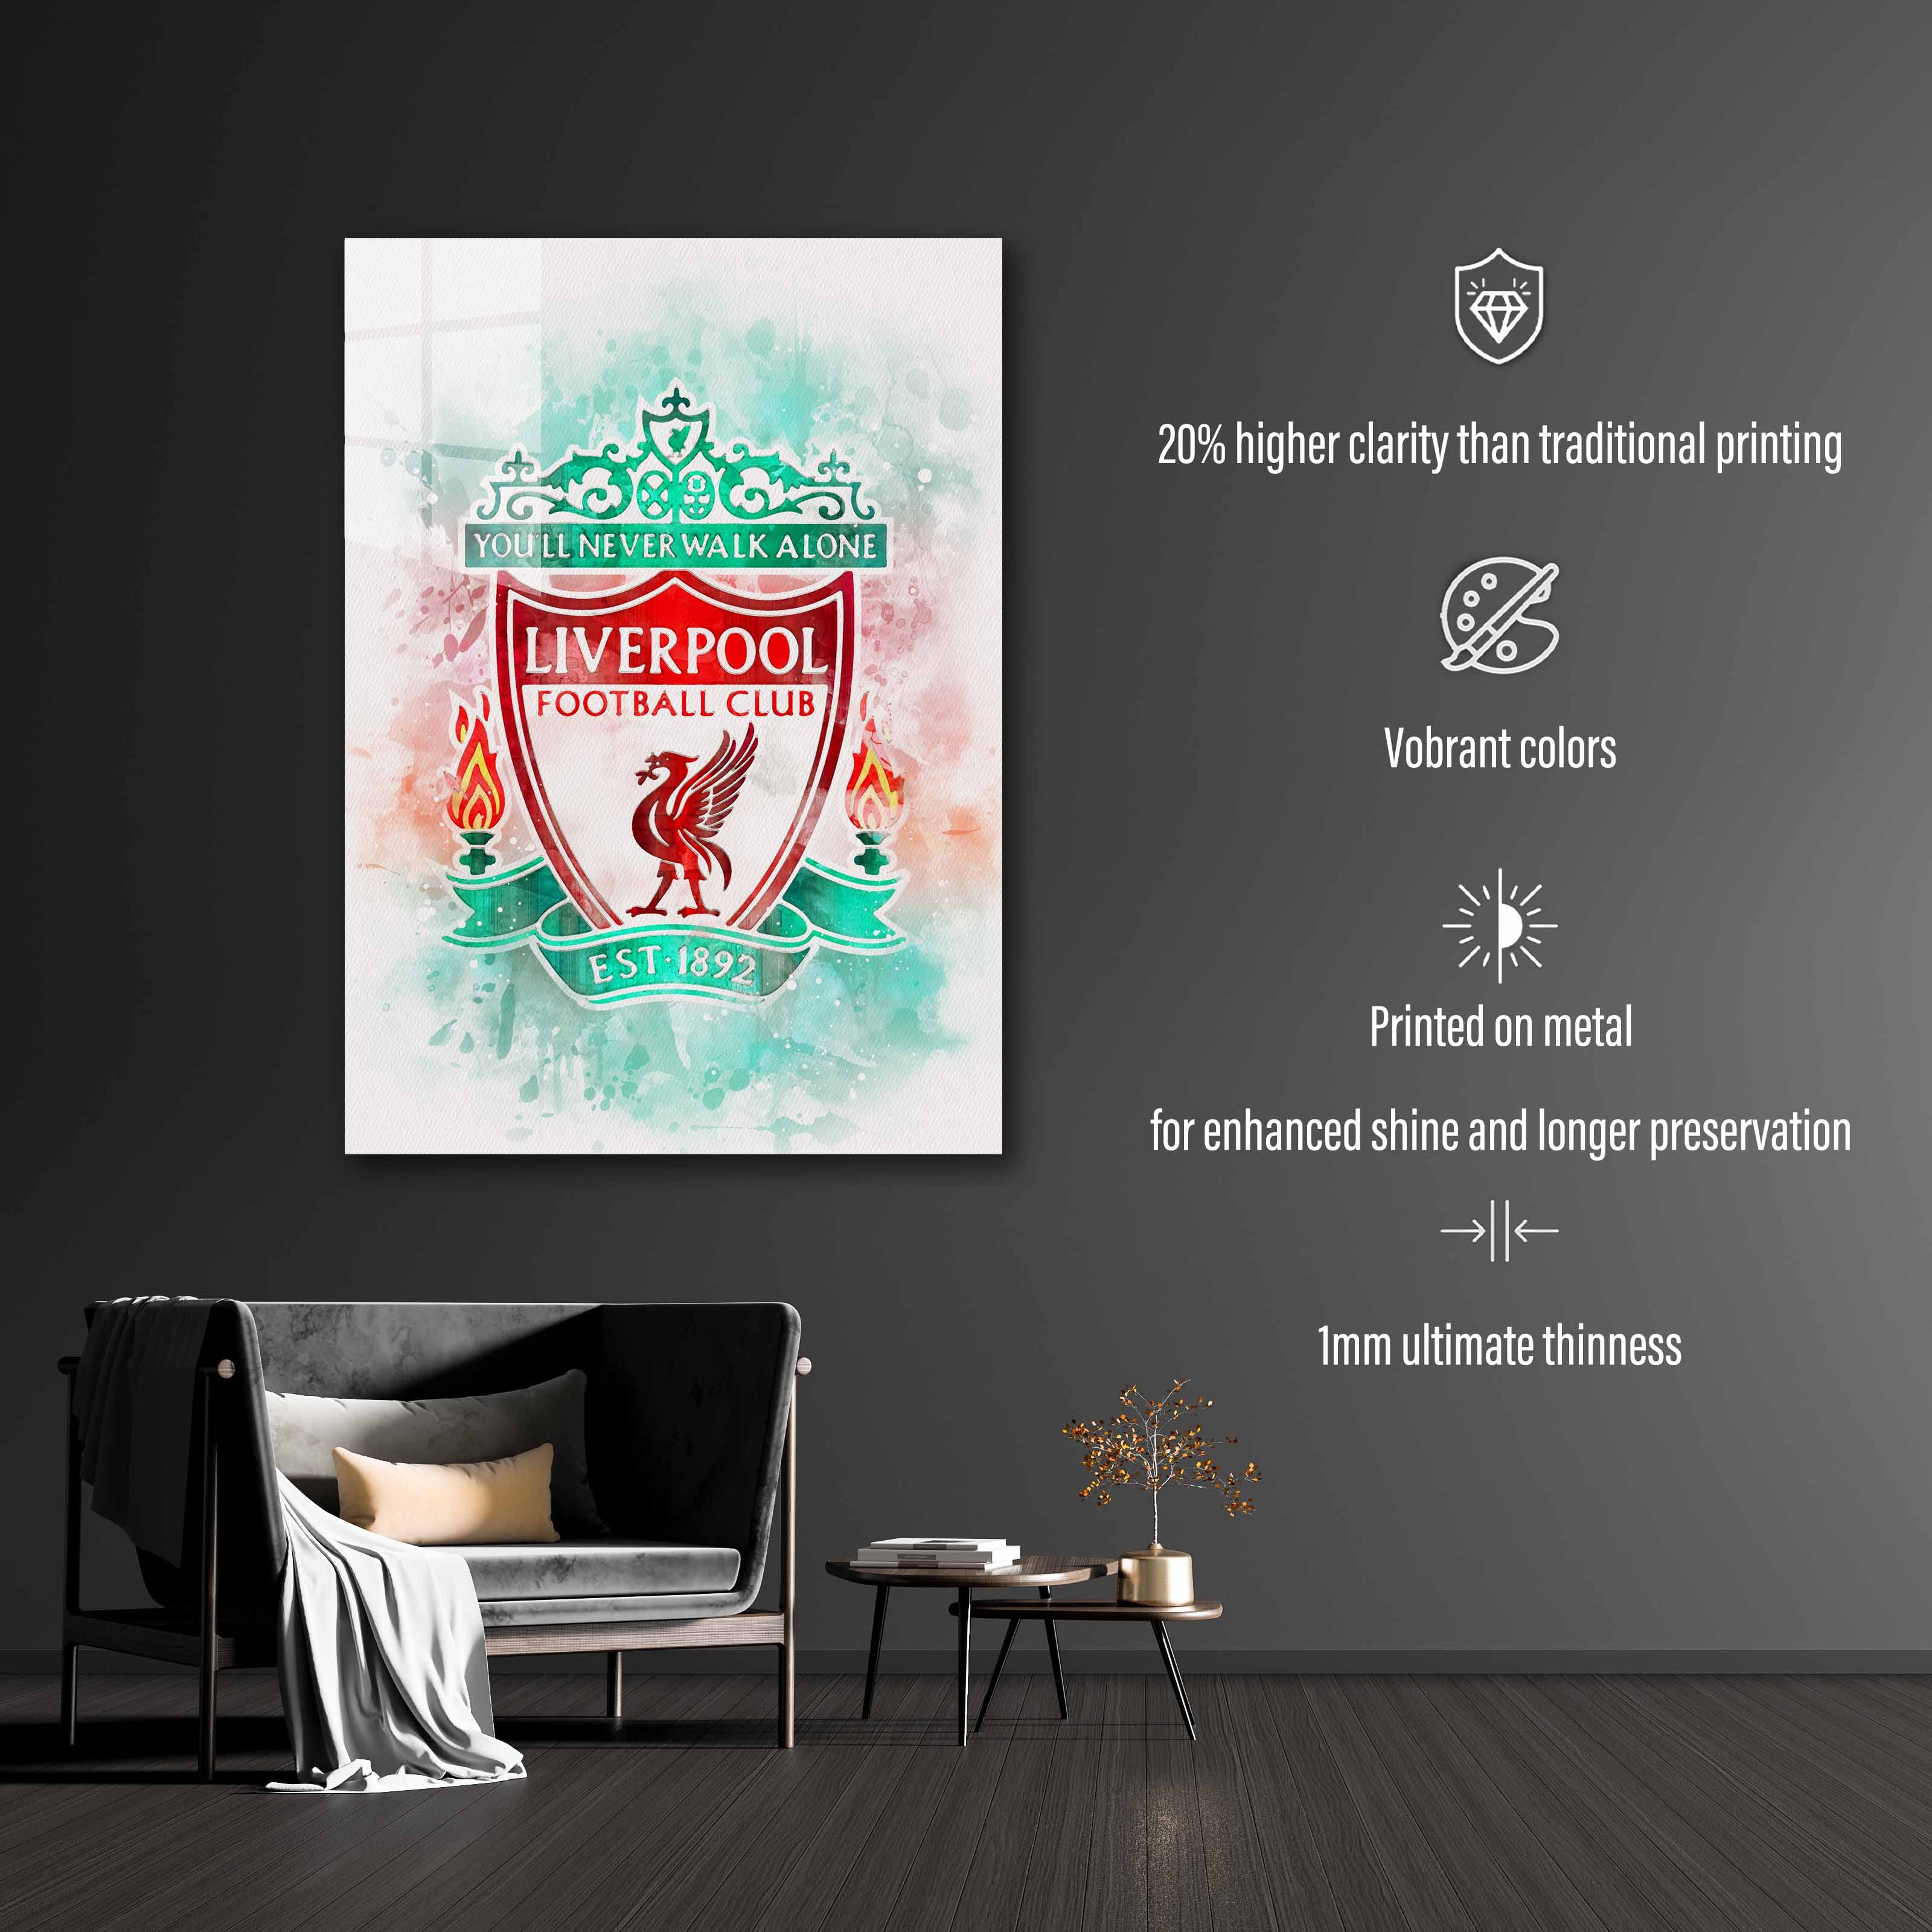 Liverpool FC poster-designed by @Hoang Van Thuan